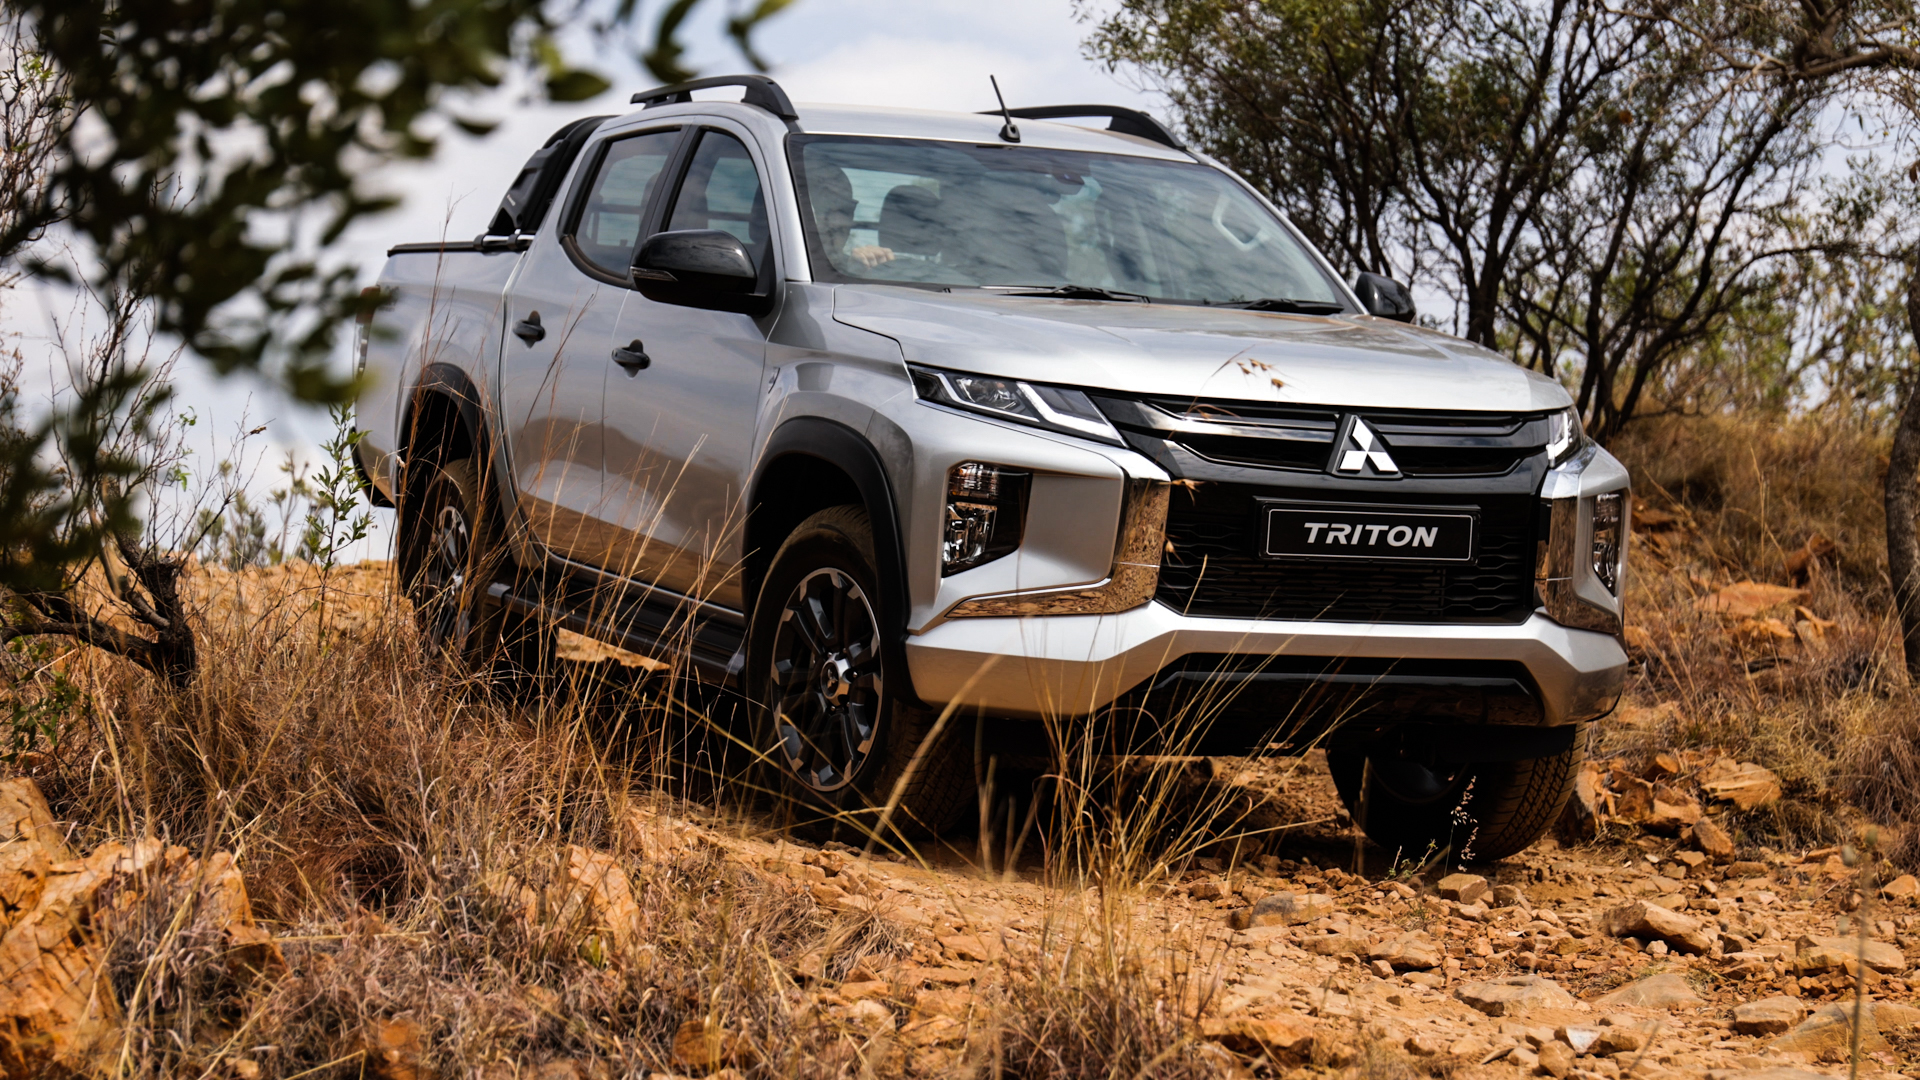 First Mitsubishi Triton Heritage Finds Owner